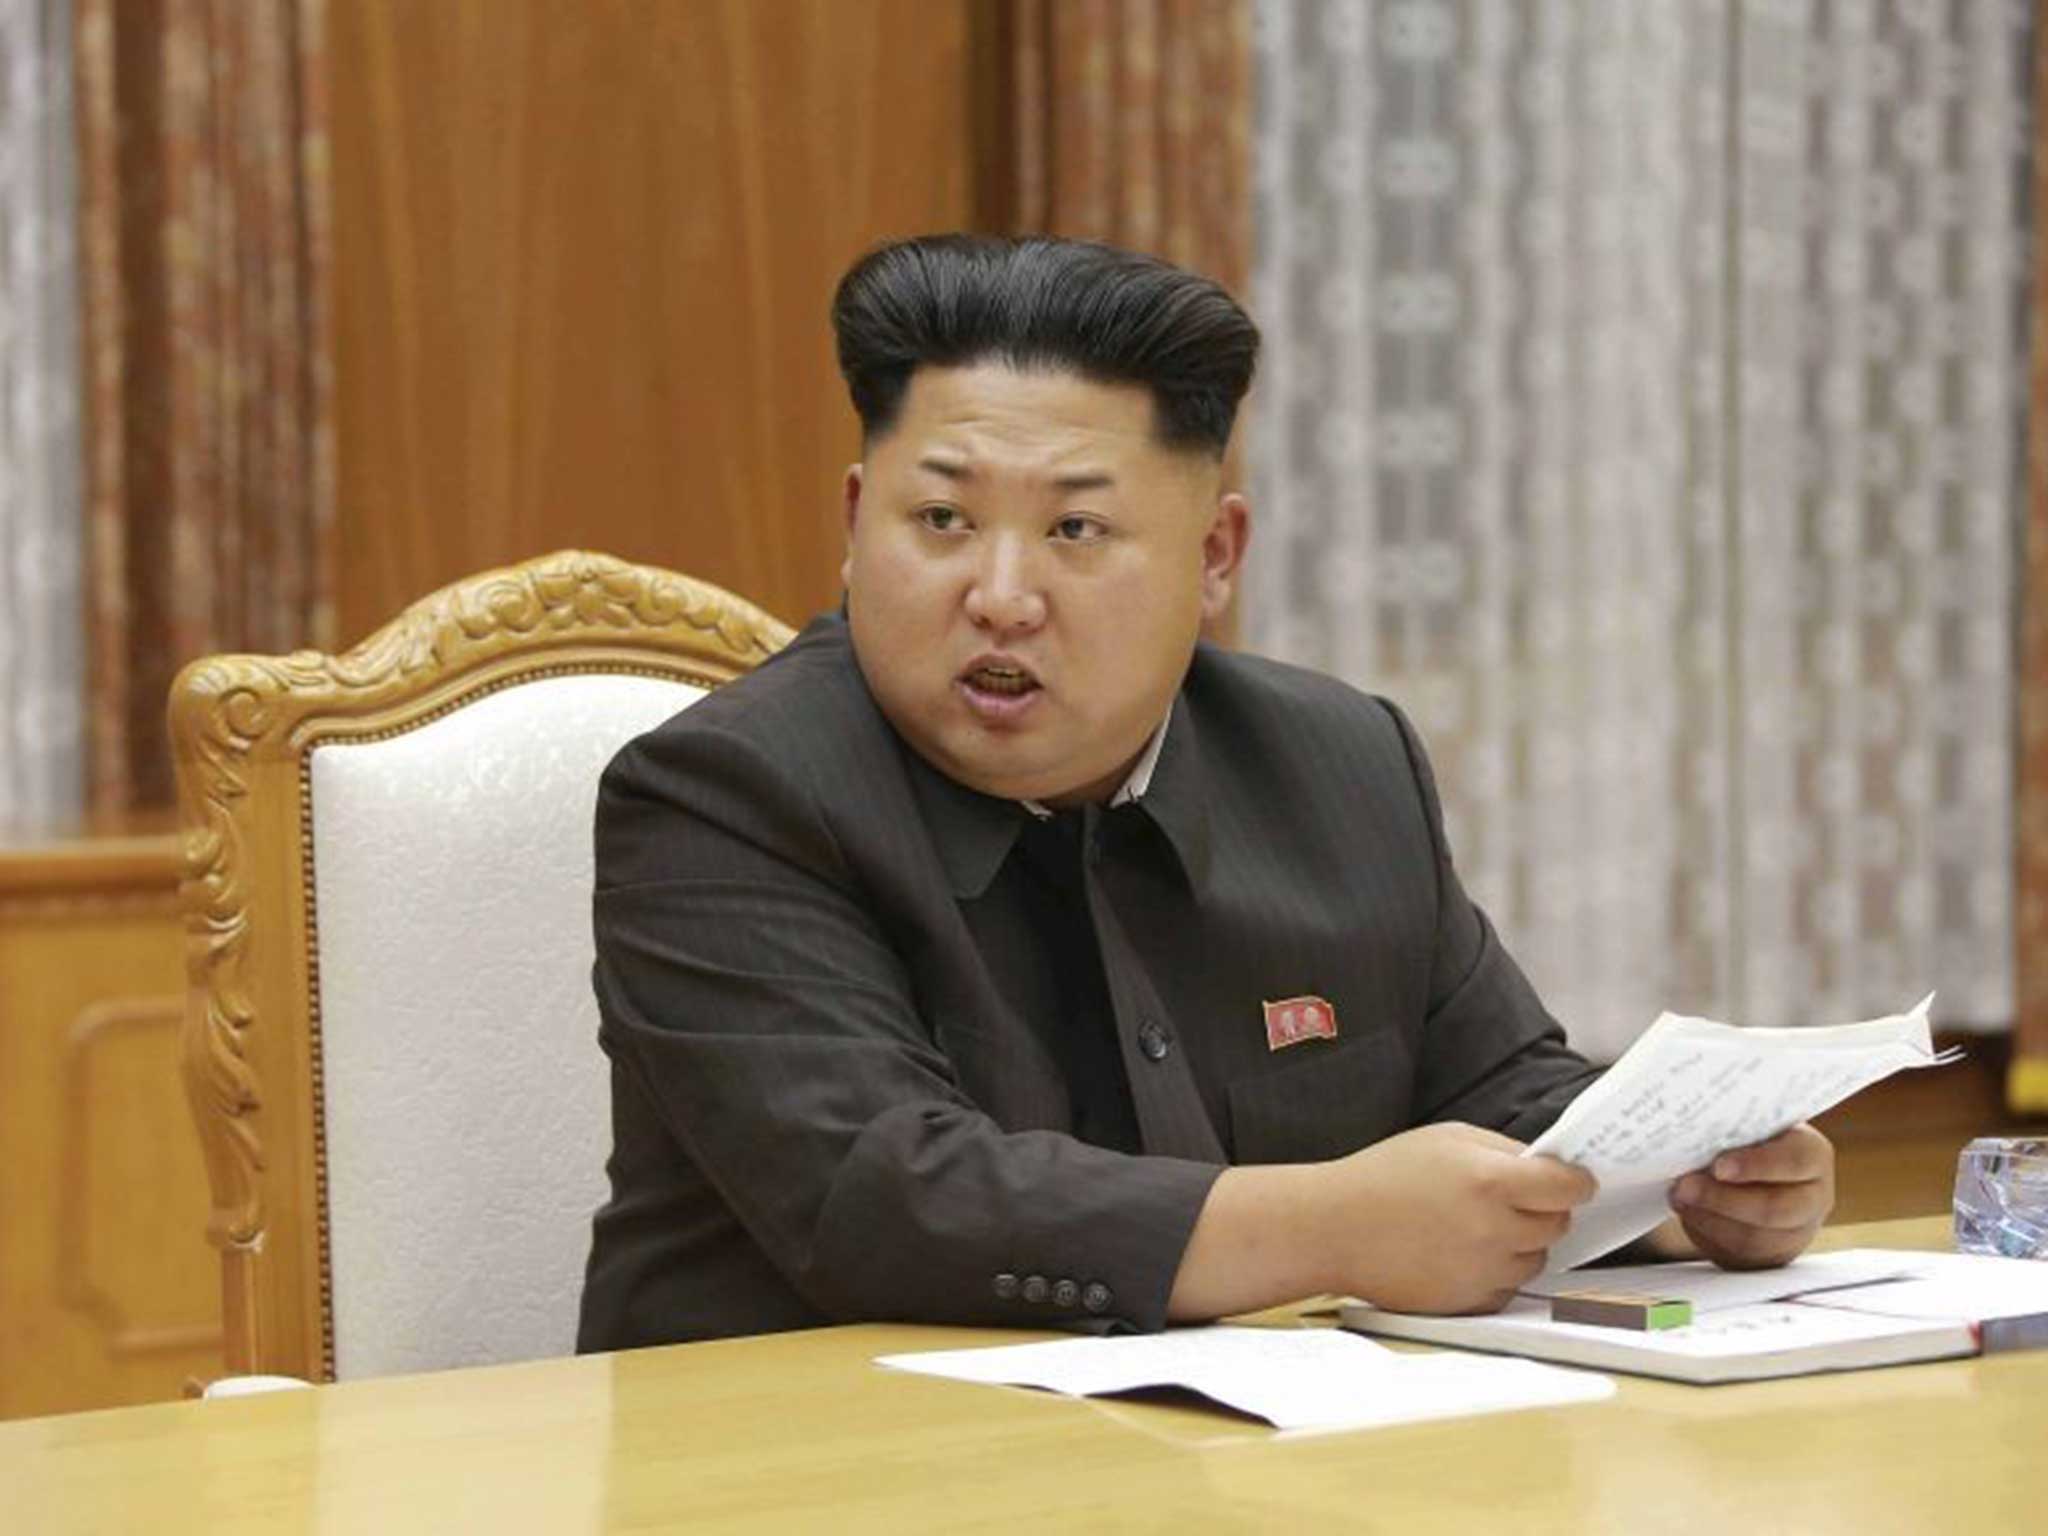 Kim speaks to North Korea generals following an escalation of tension along the DMZ